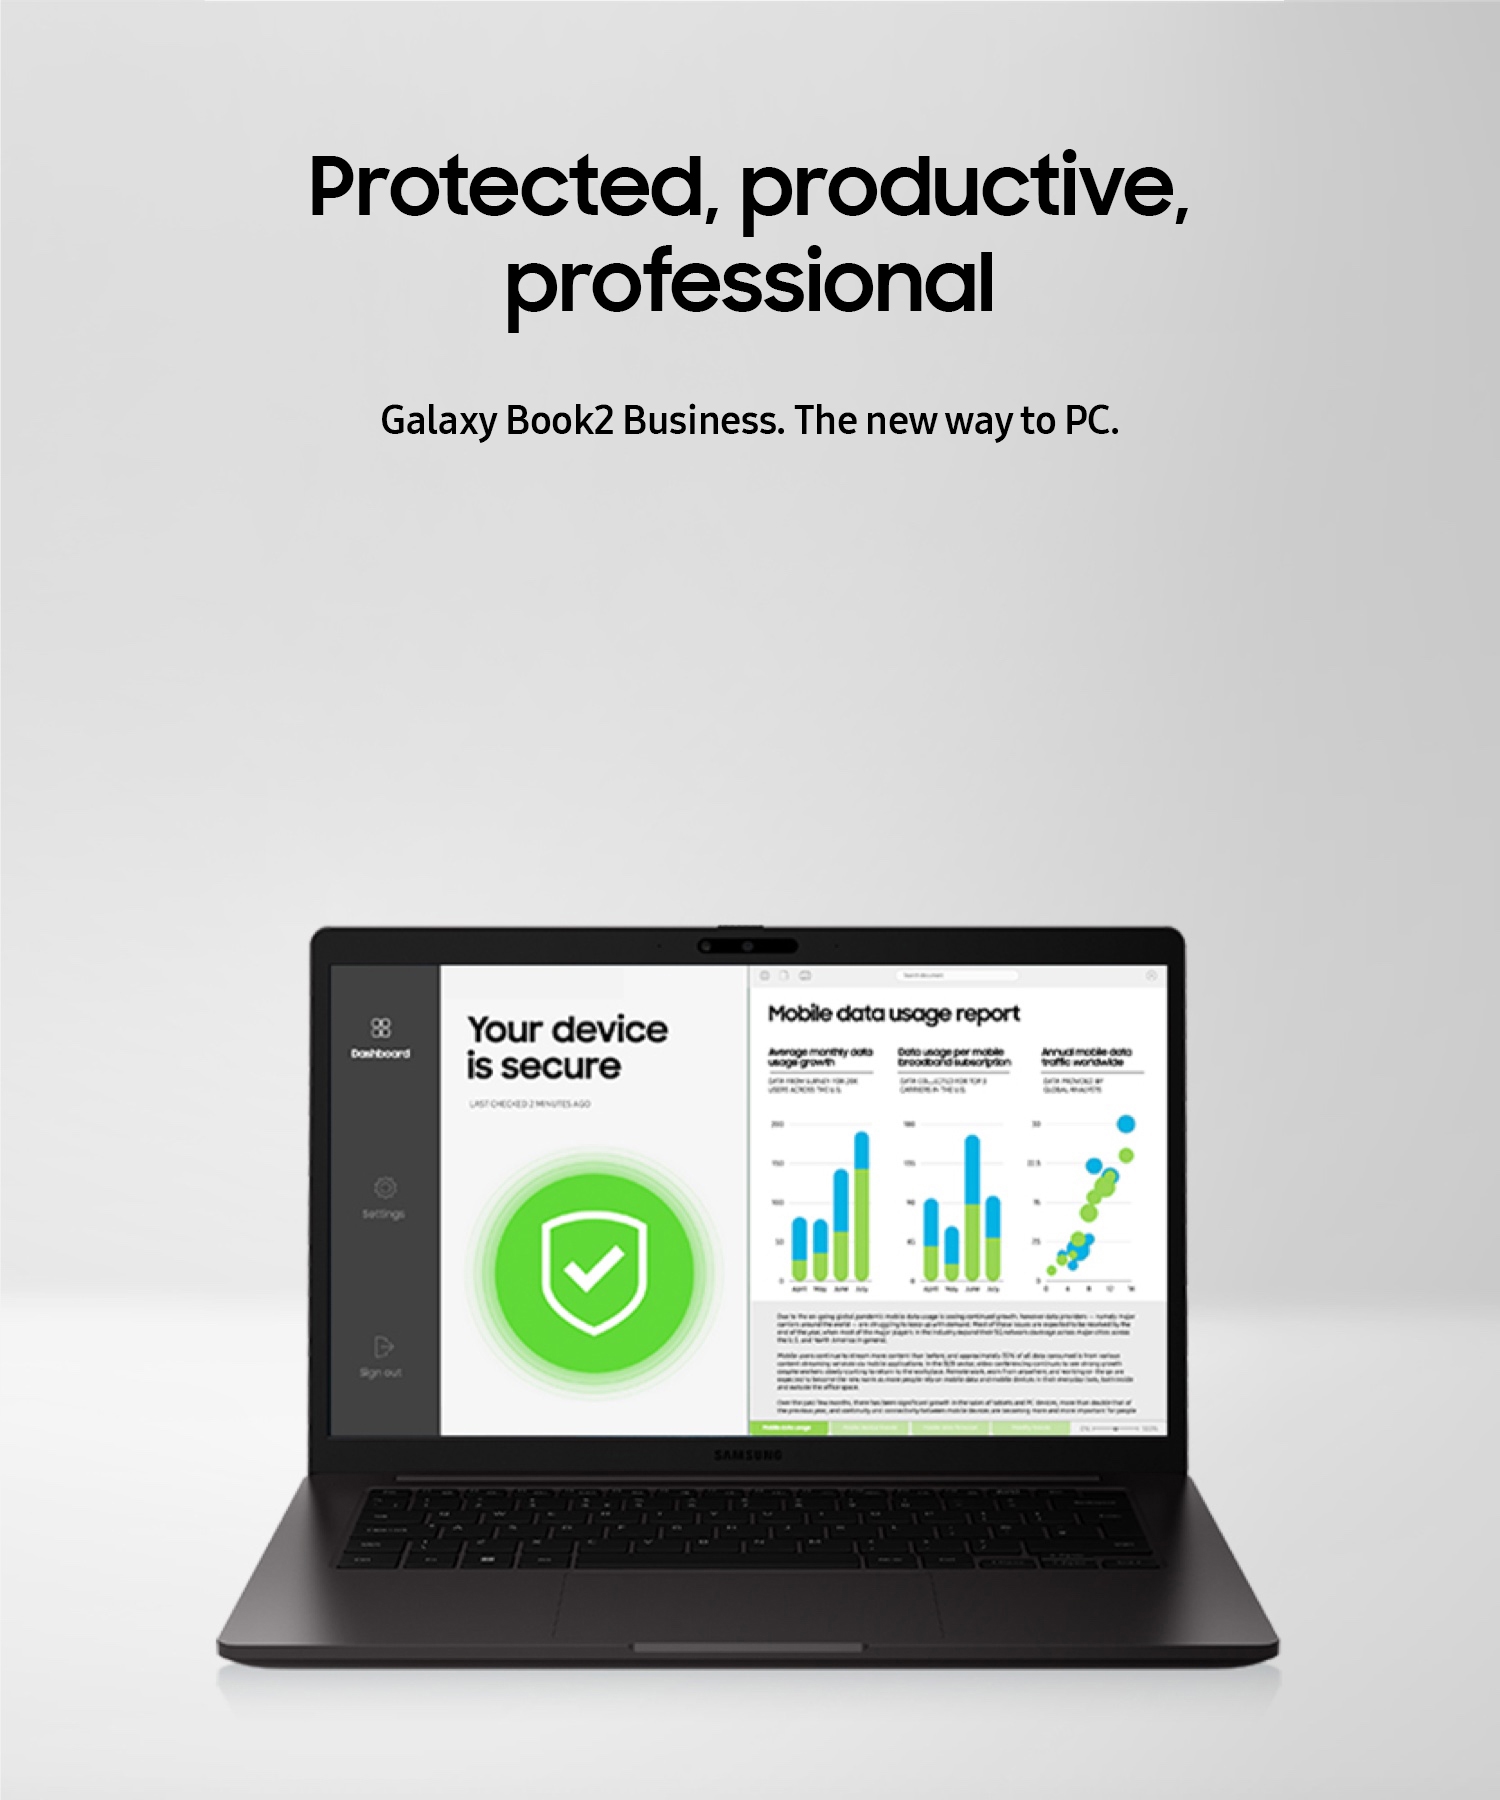 Protected, productive, professional